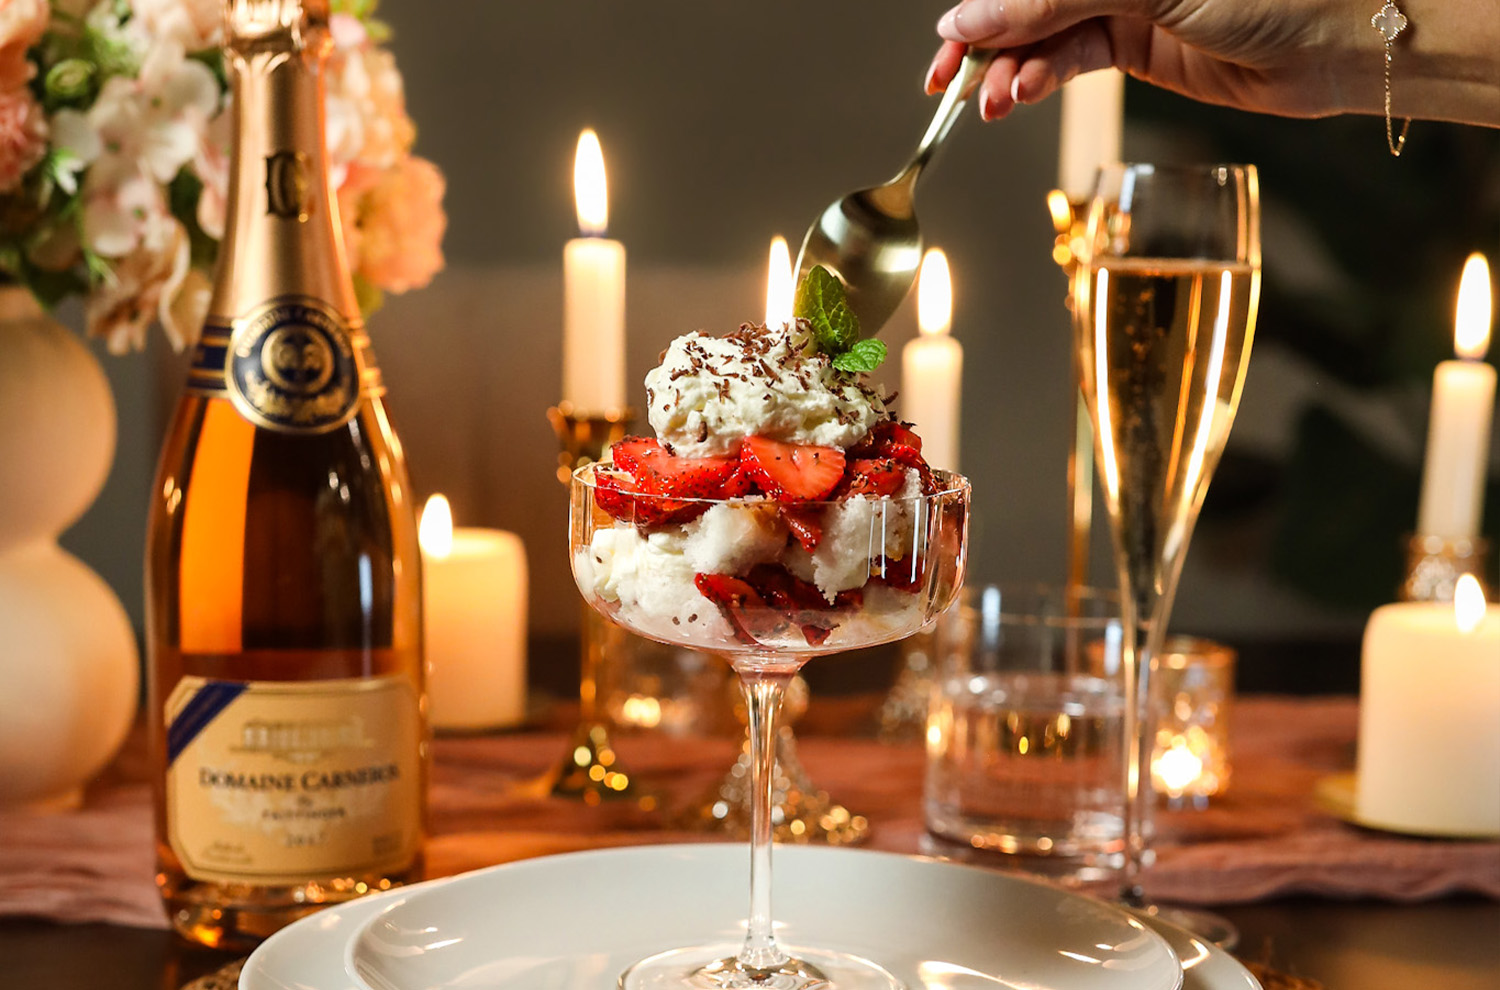 Brut Rosé pairing with a Mini Strawberry Shortcake Trifles pairing